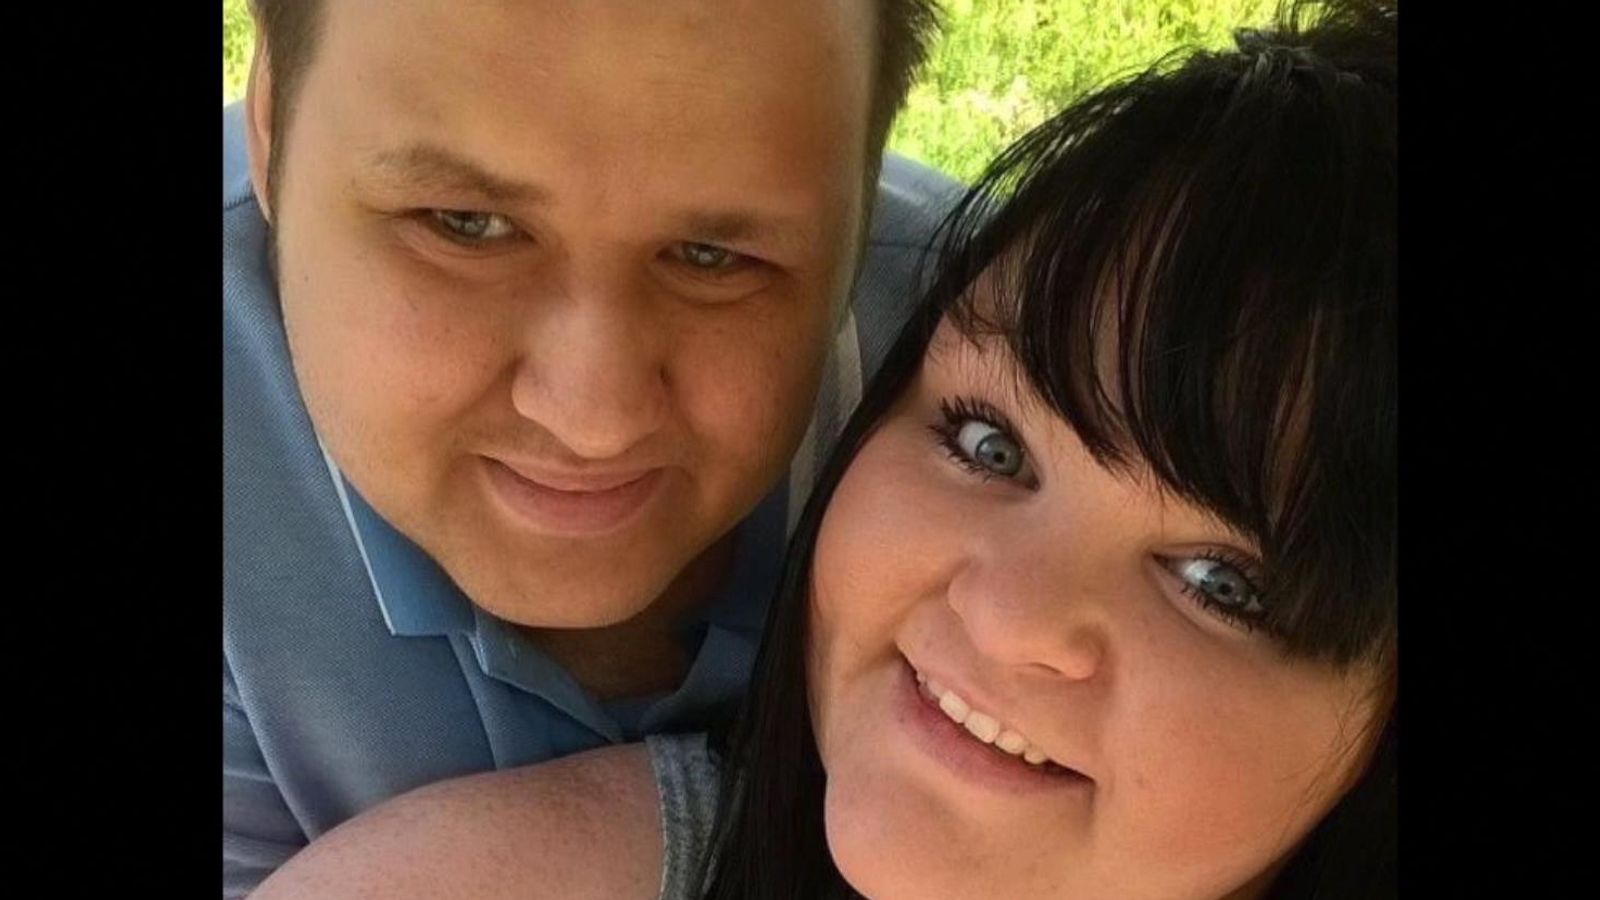 Coronavirus: Grieving woman shares final text from fiance who died with COVID-19